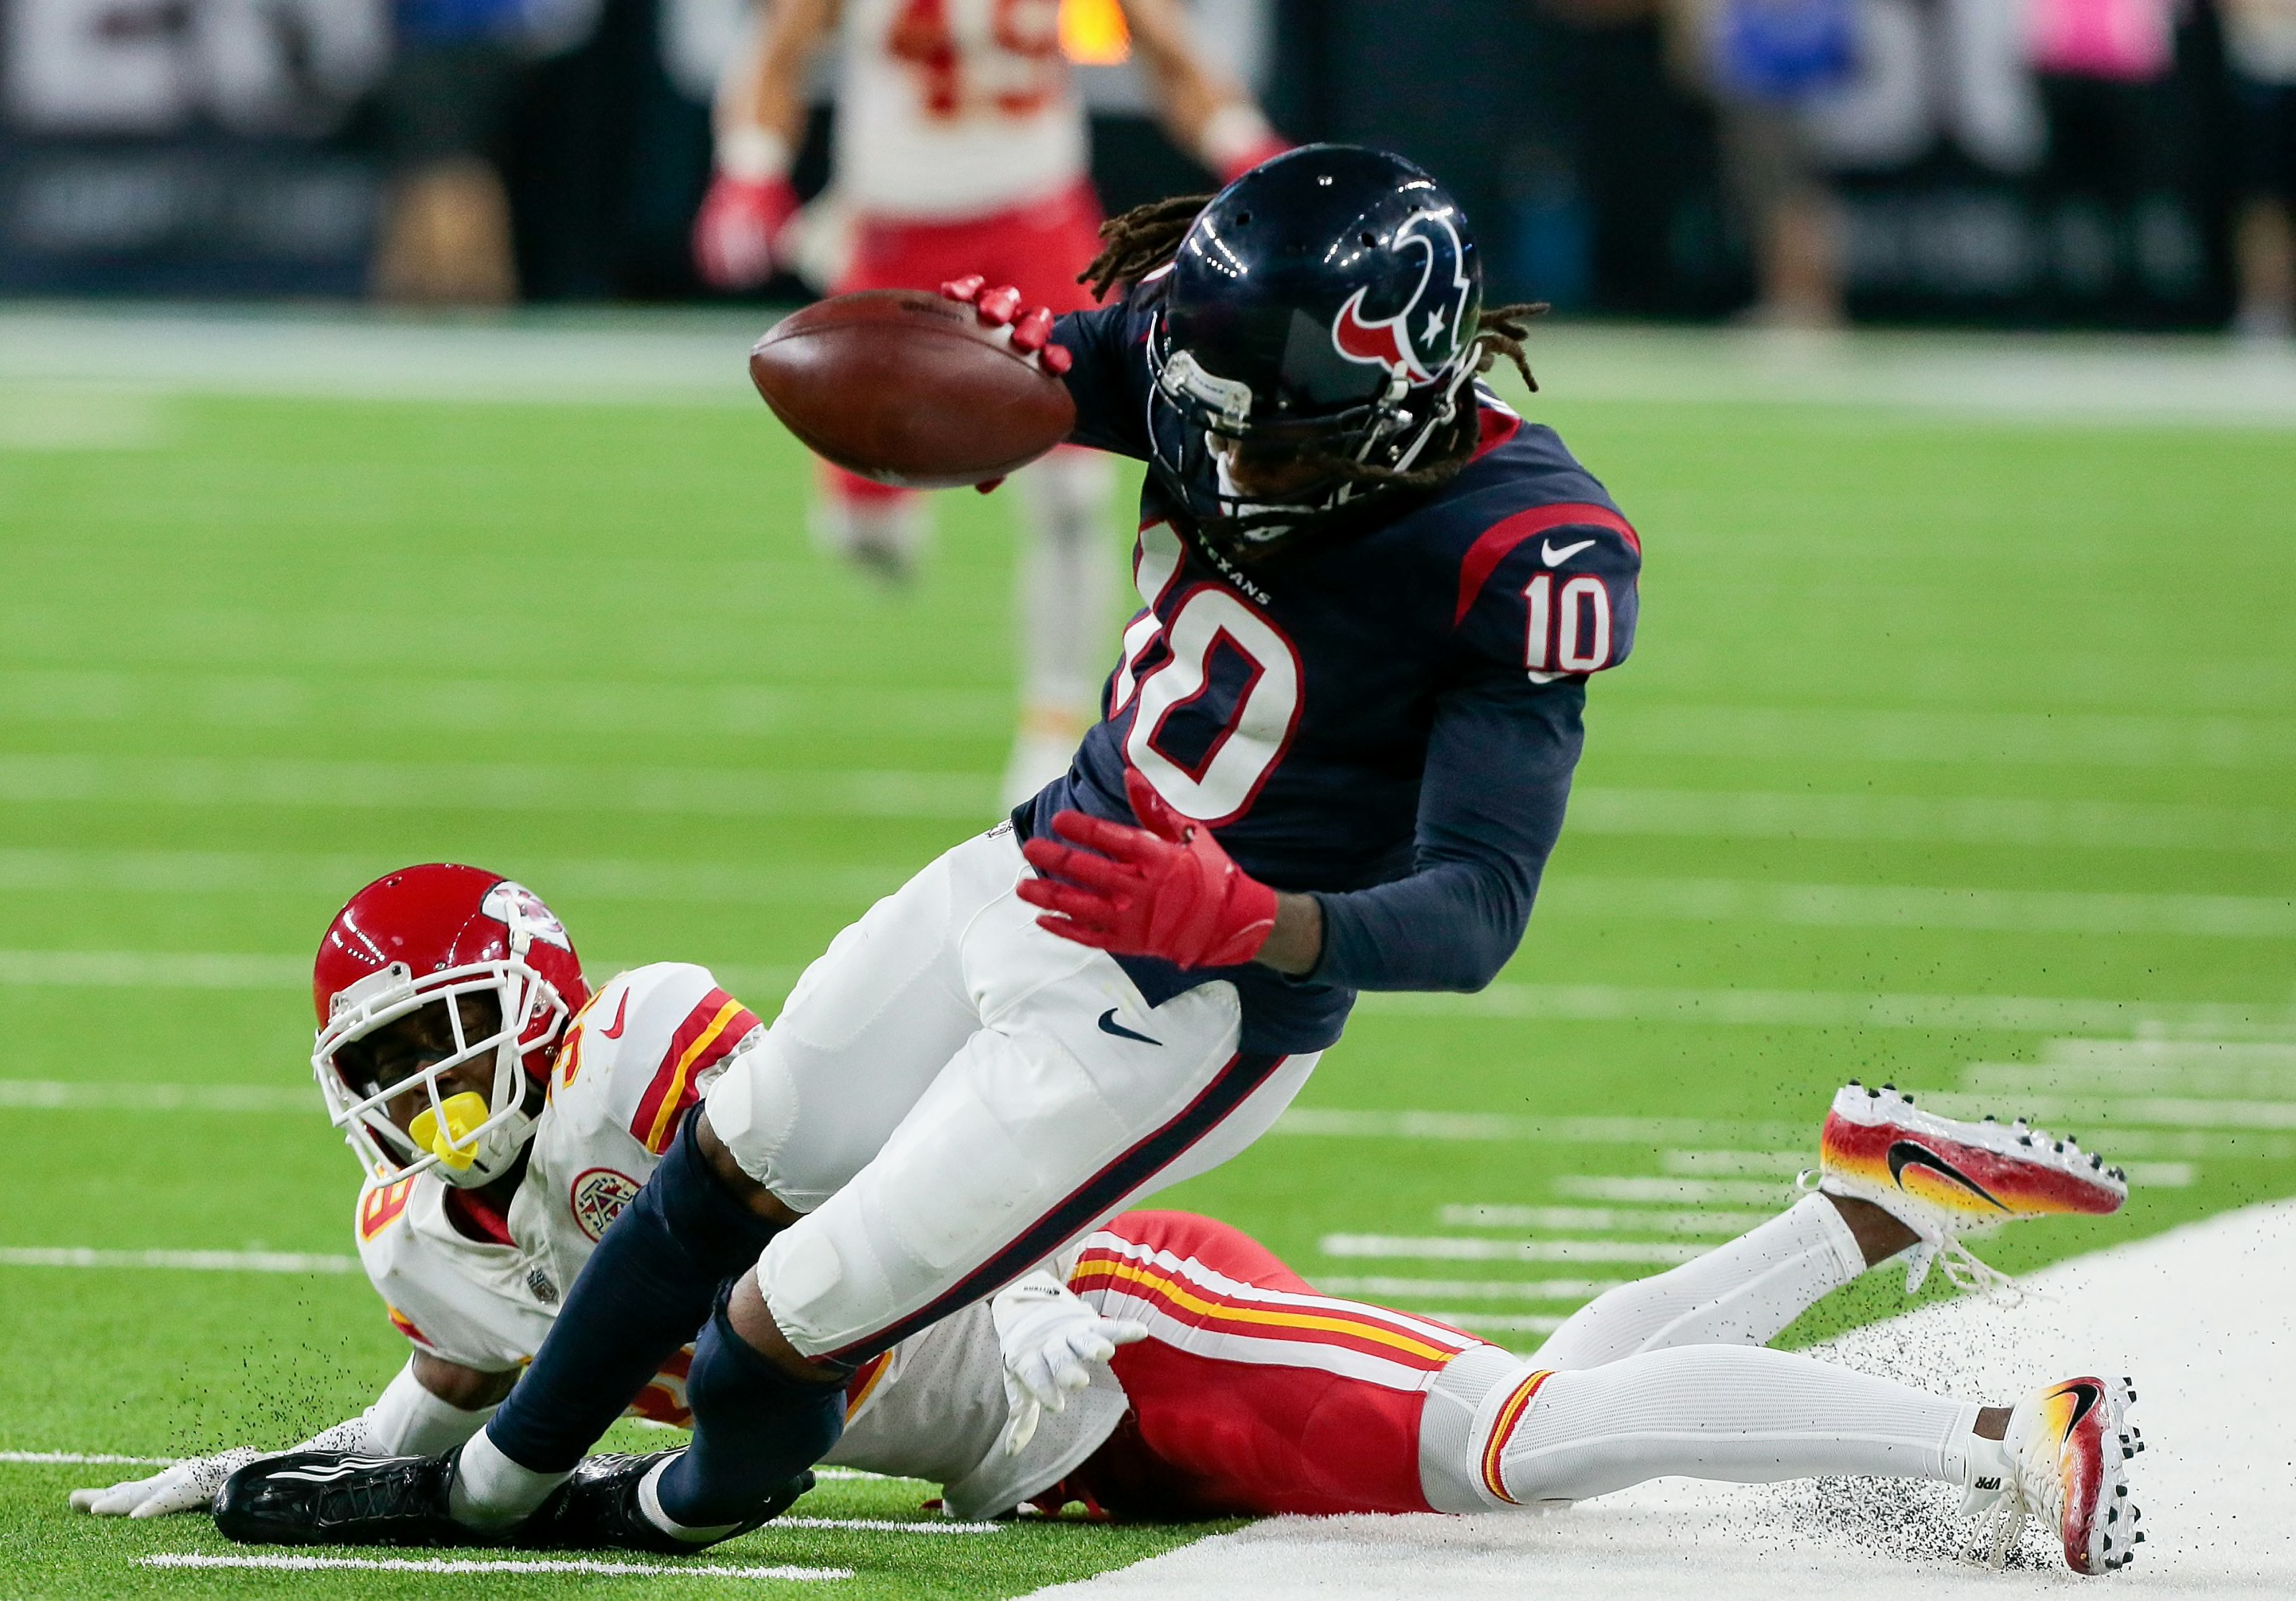 Four receivers Kansas City Chiefs must contain in 2019 - Page 3